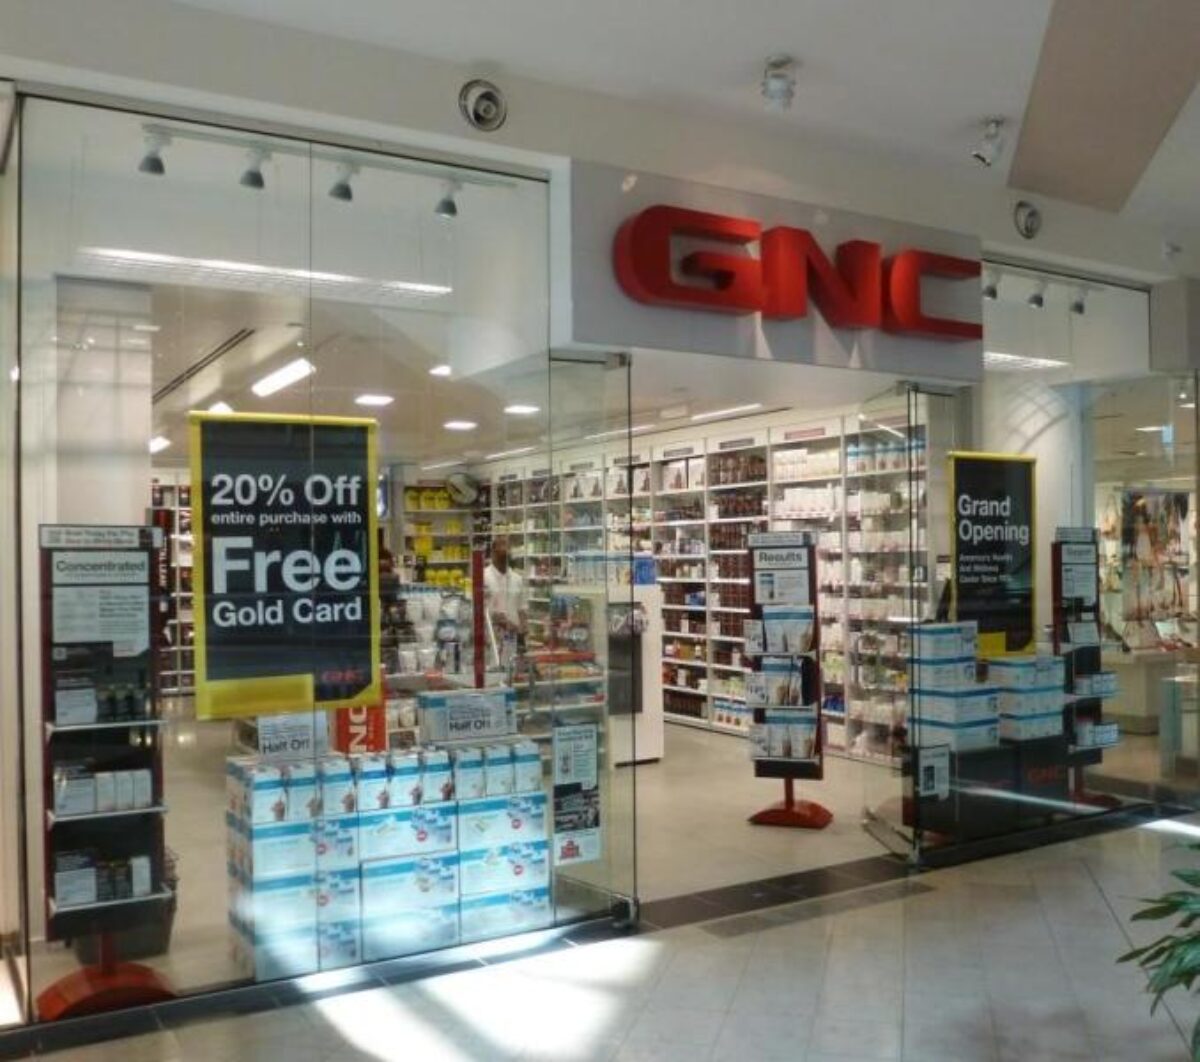 Hemet Valley Mall » GNC March and April sales